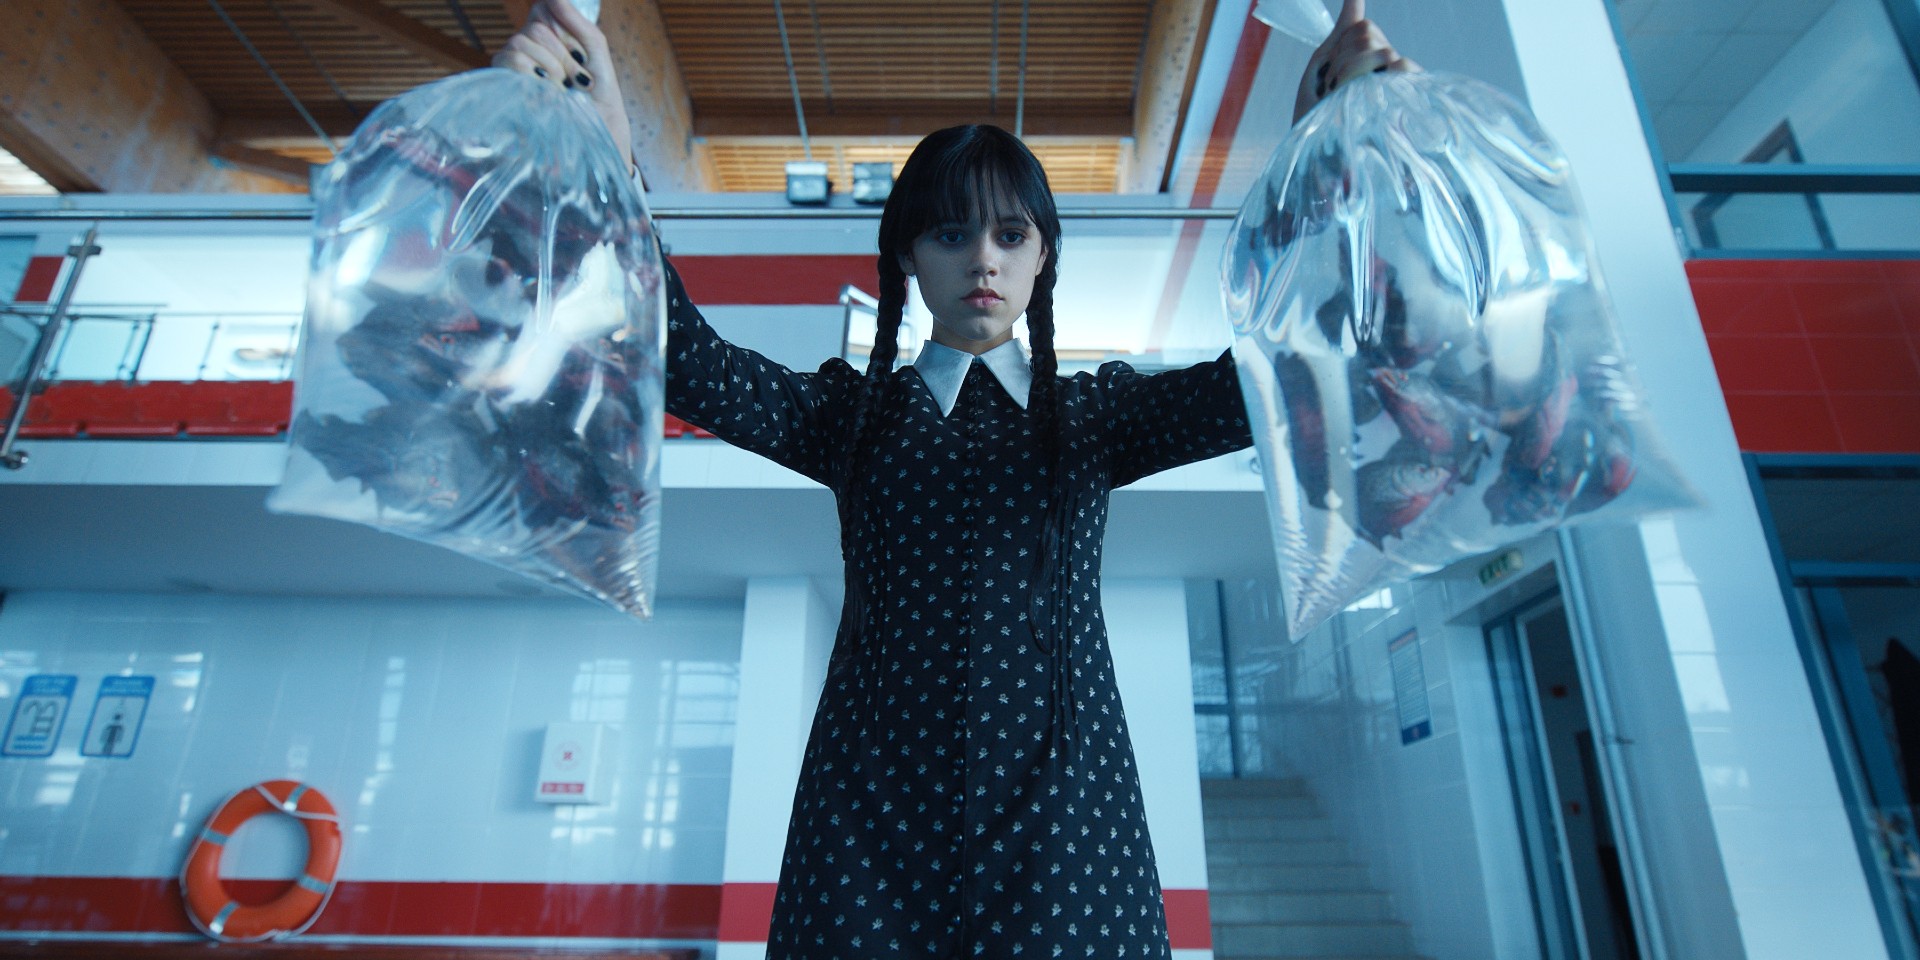 Jenna Ortega, as Wednesday Addams, holds two bags filled with piranhas.